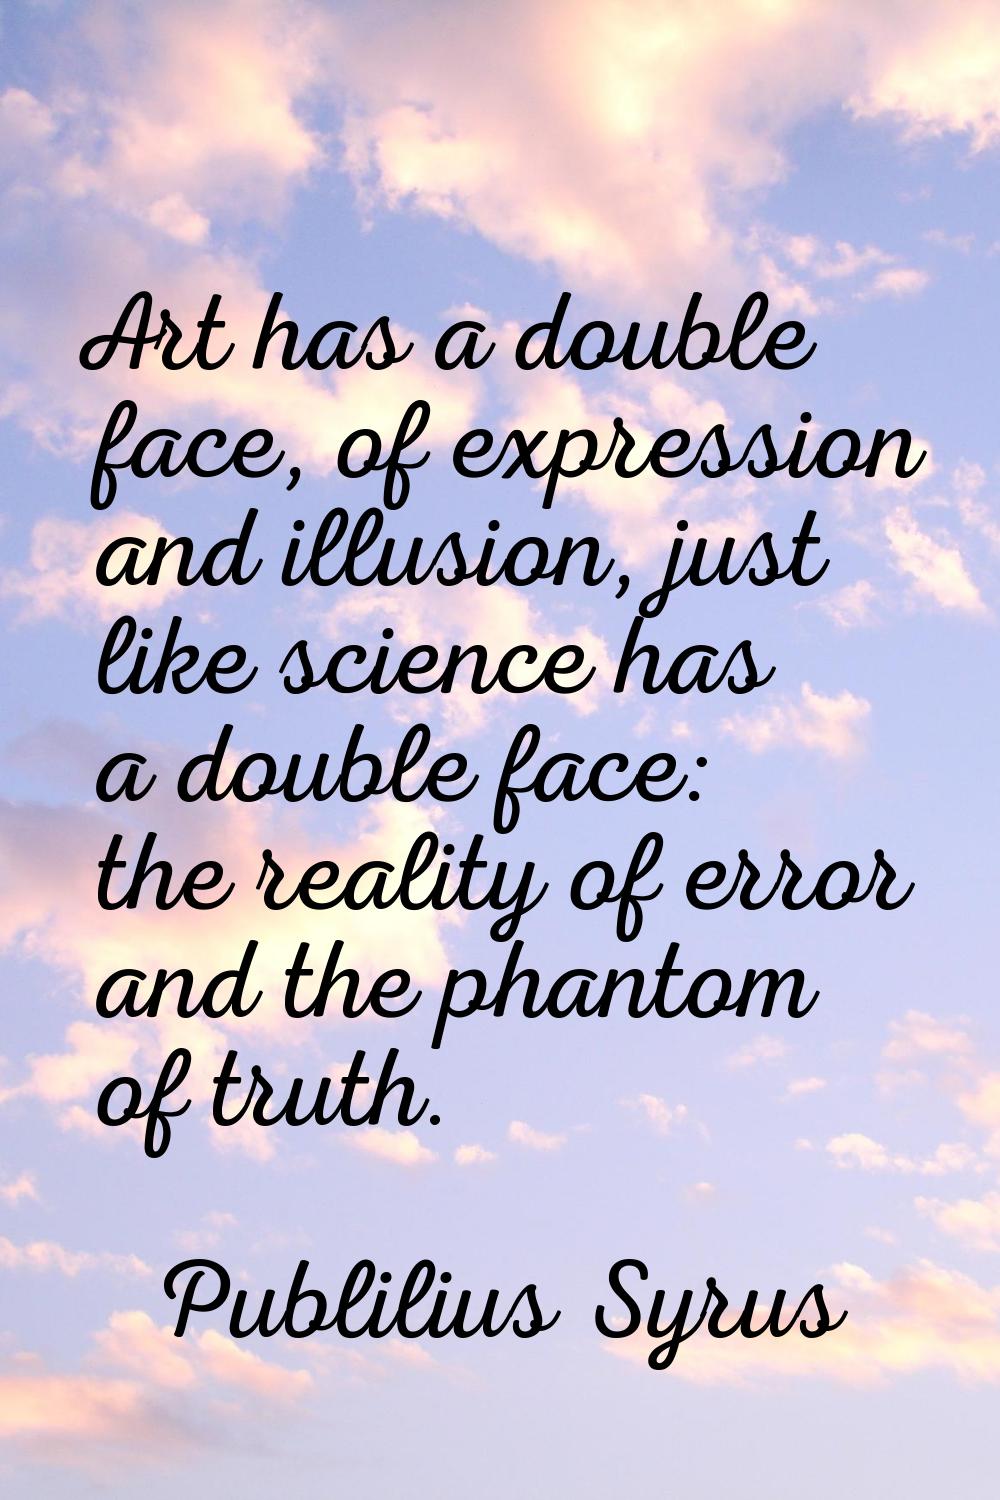 Art has a double face, of expression and illusion, just like science has a double face: the reality